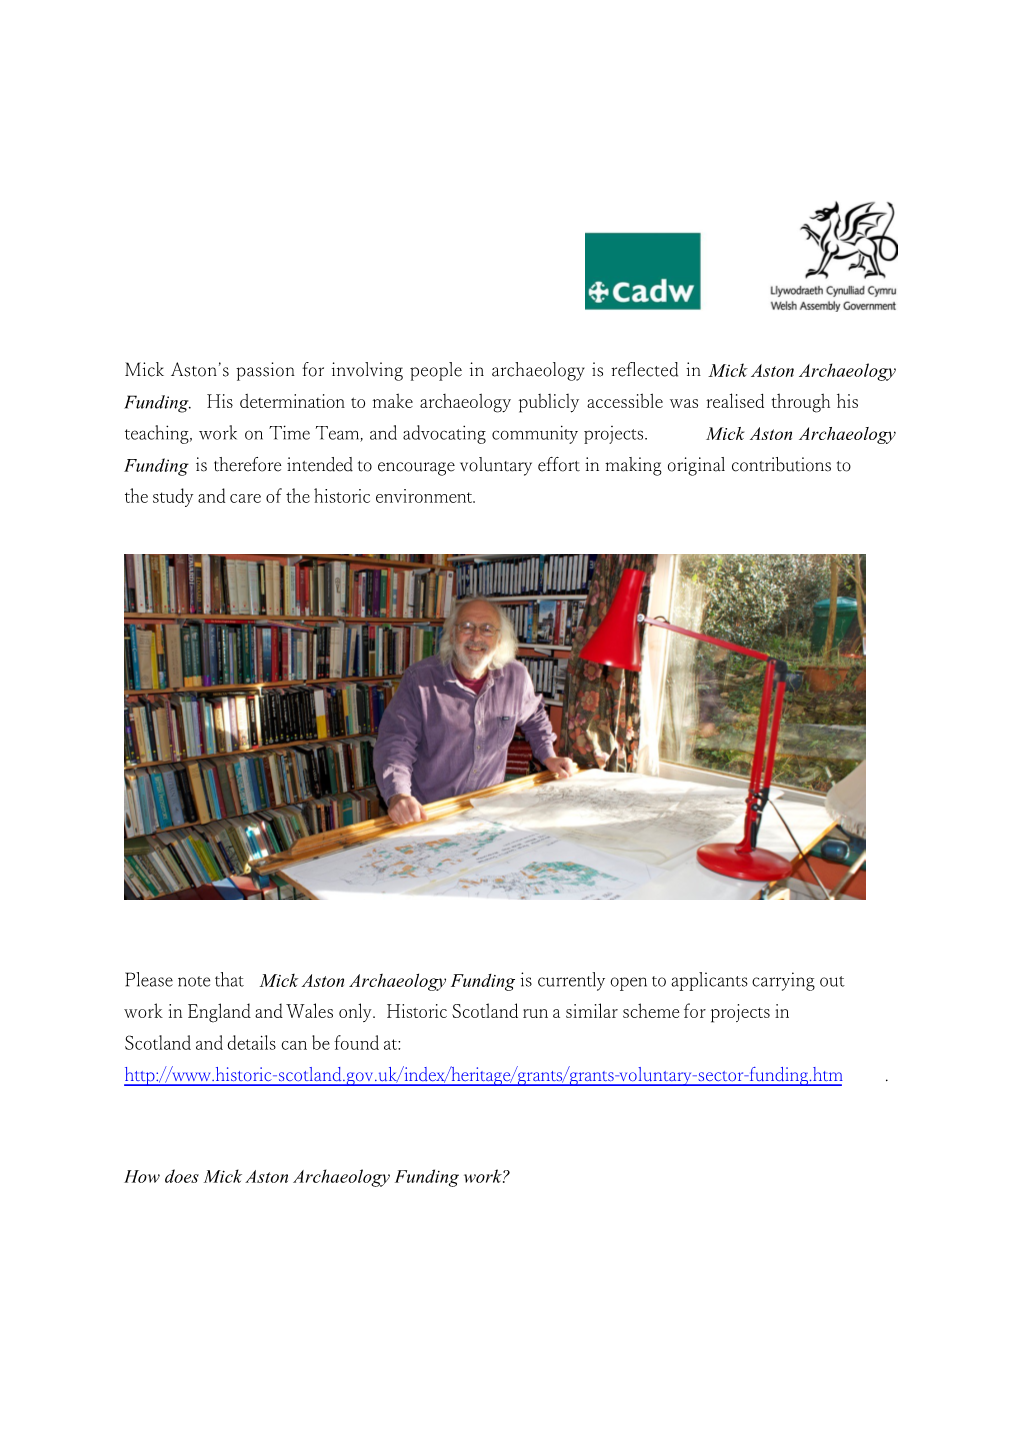 How Does Mick Astonarchaeology Funding Work?